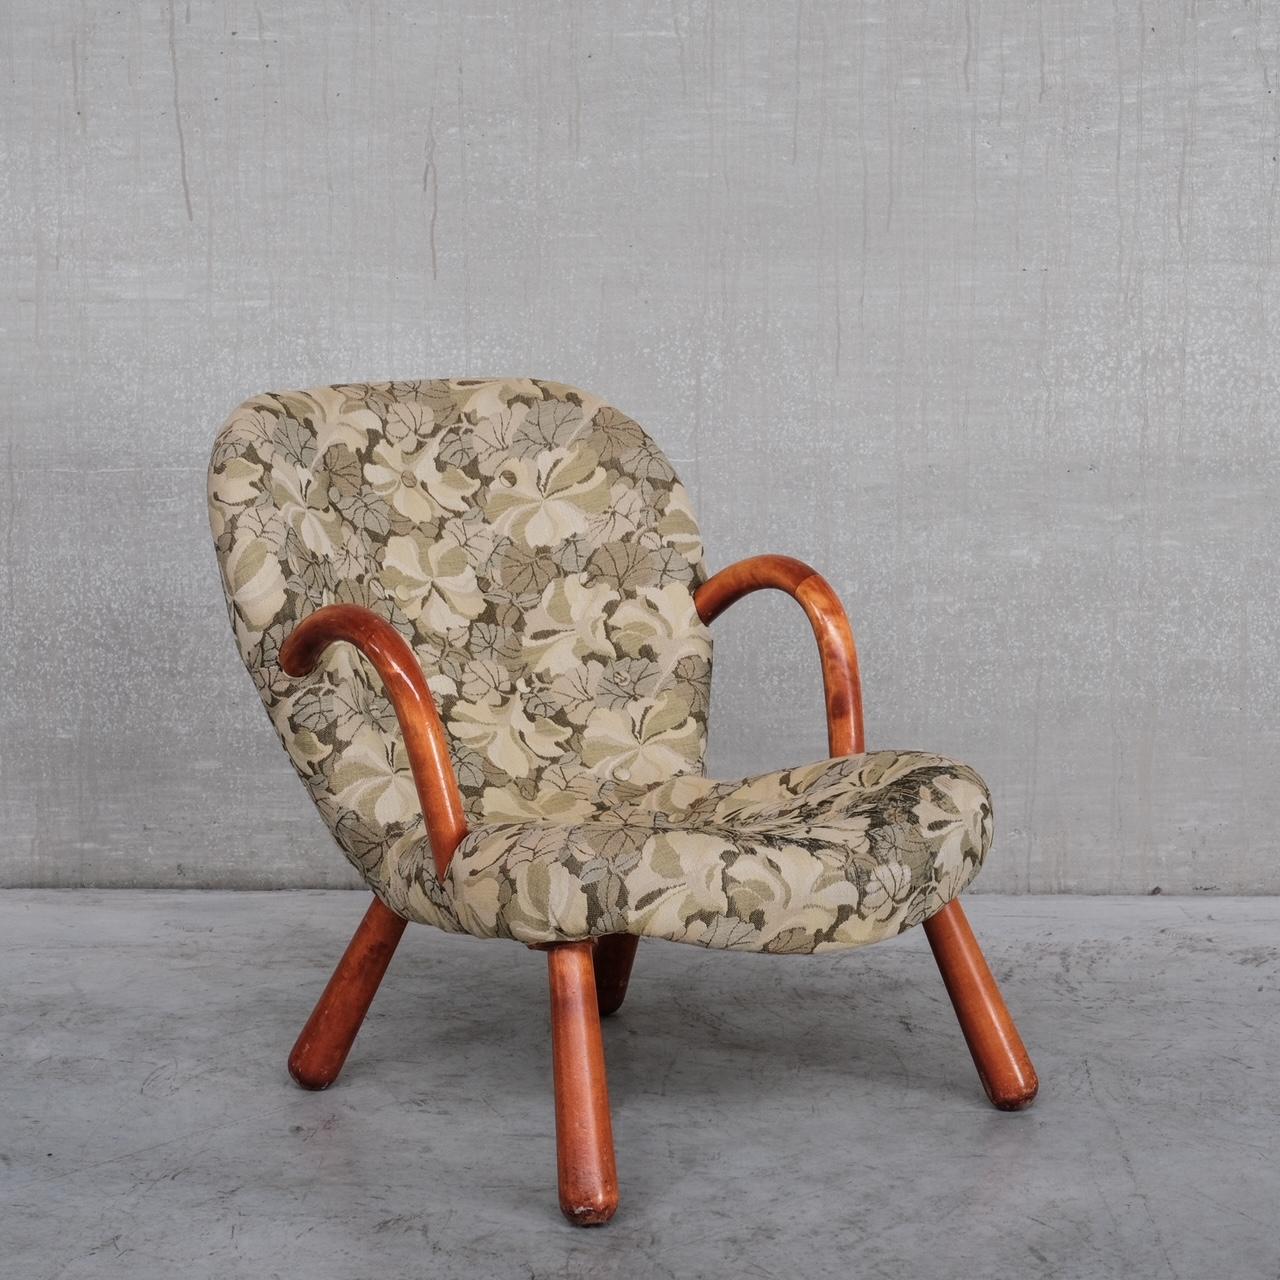 An increasingly hard to find 'clam' chair. 

Denmark, c1950s. 

Attributed to Arnold Madsen, similar models were made by Philip Arctander. 

Original fabric retained which has signs of age, and is ripe for re-upholstery, these are often done